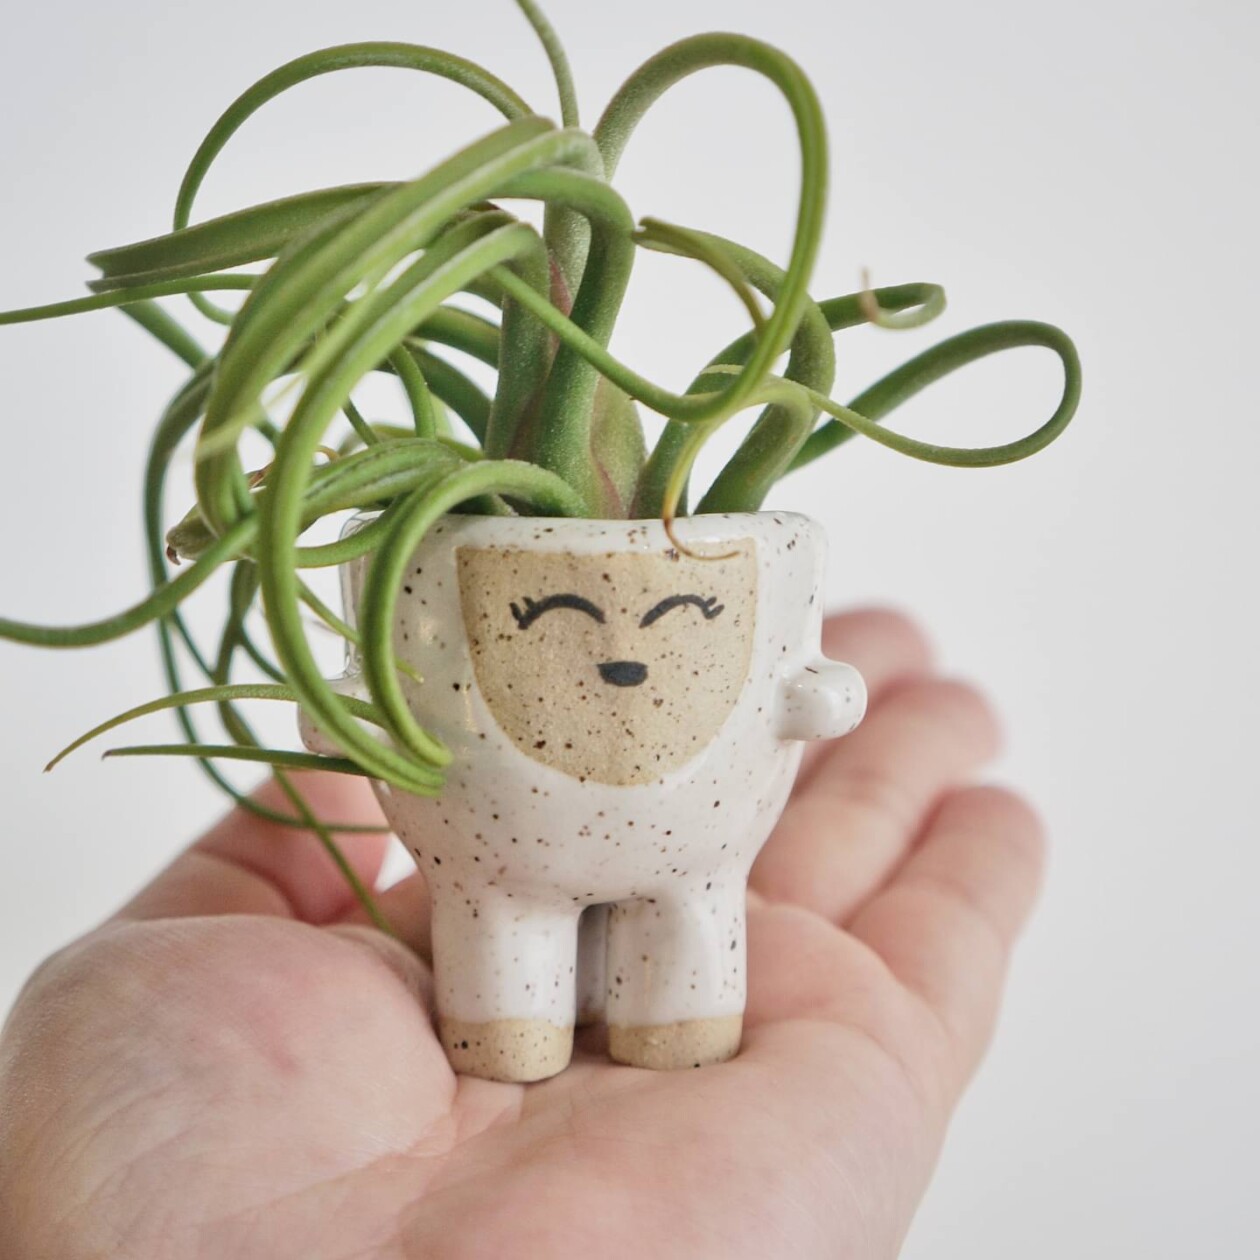 Amusing And Adorable Anthropomorphic Planters By Abby Ozaltug (3)